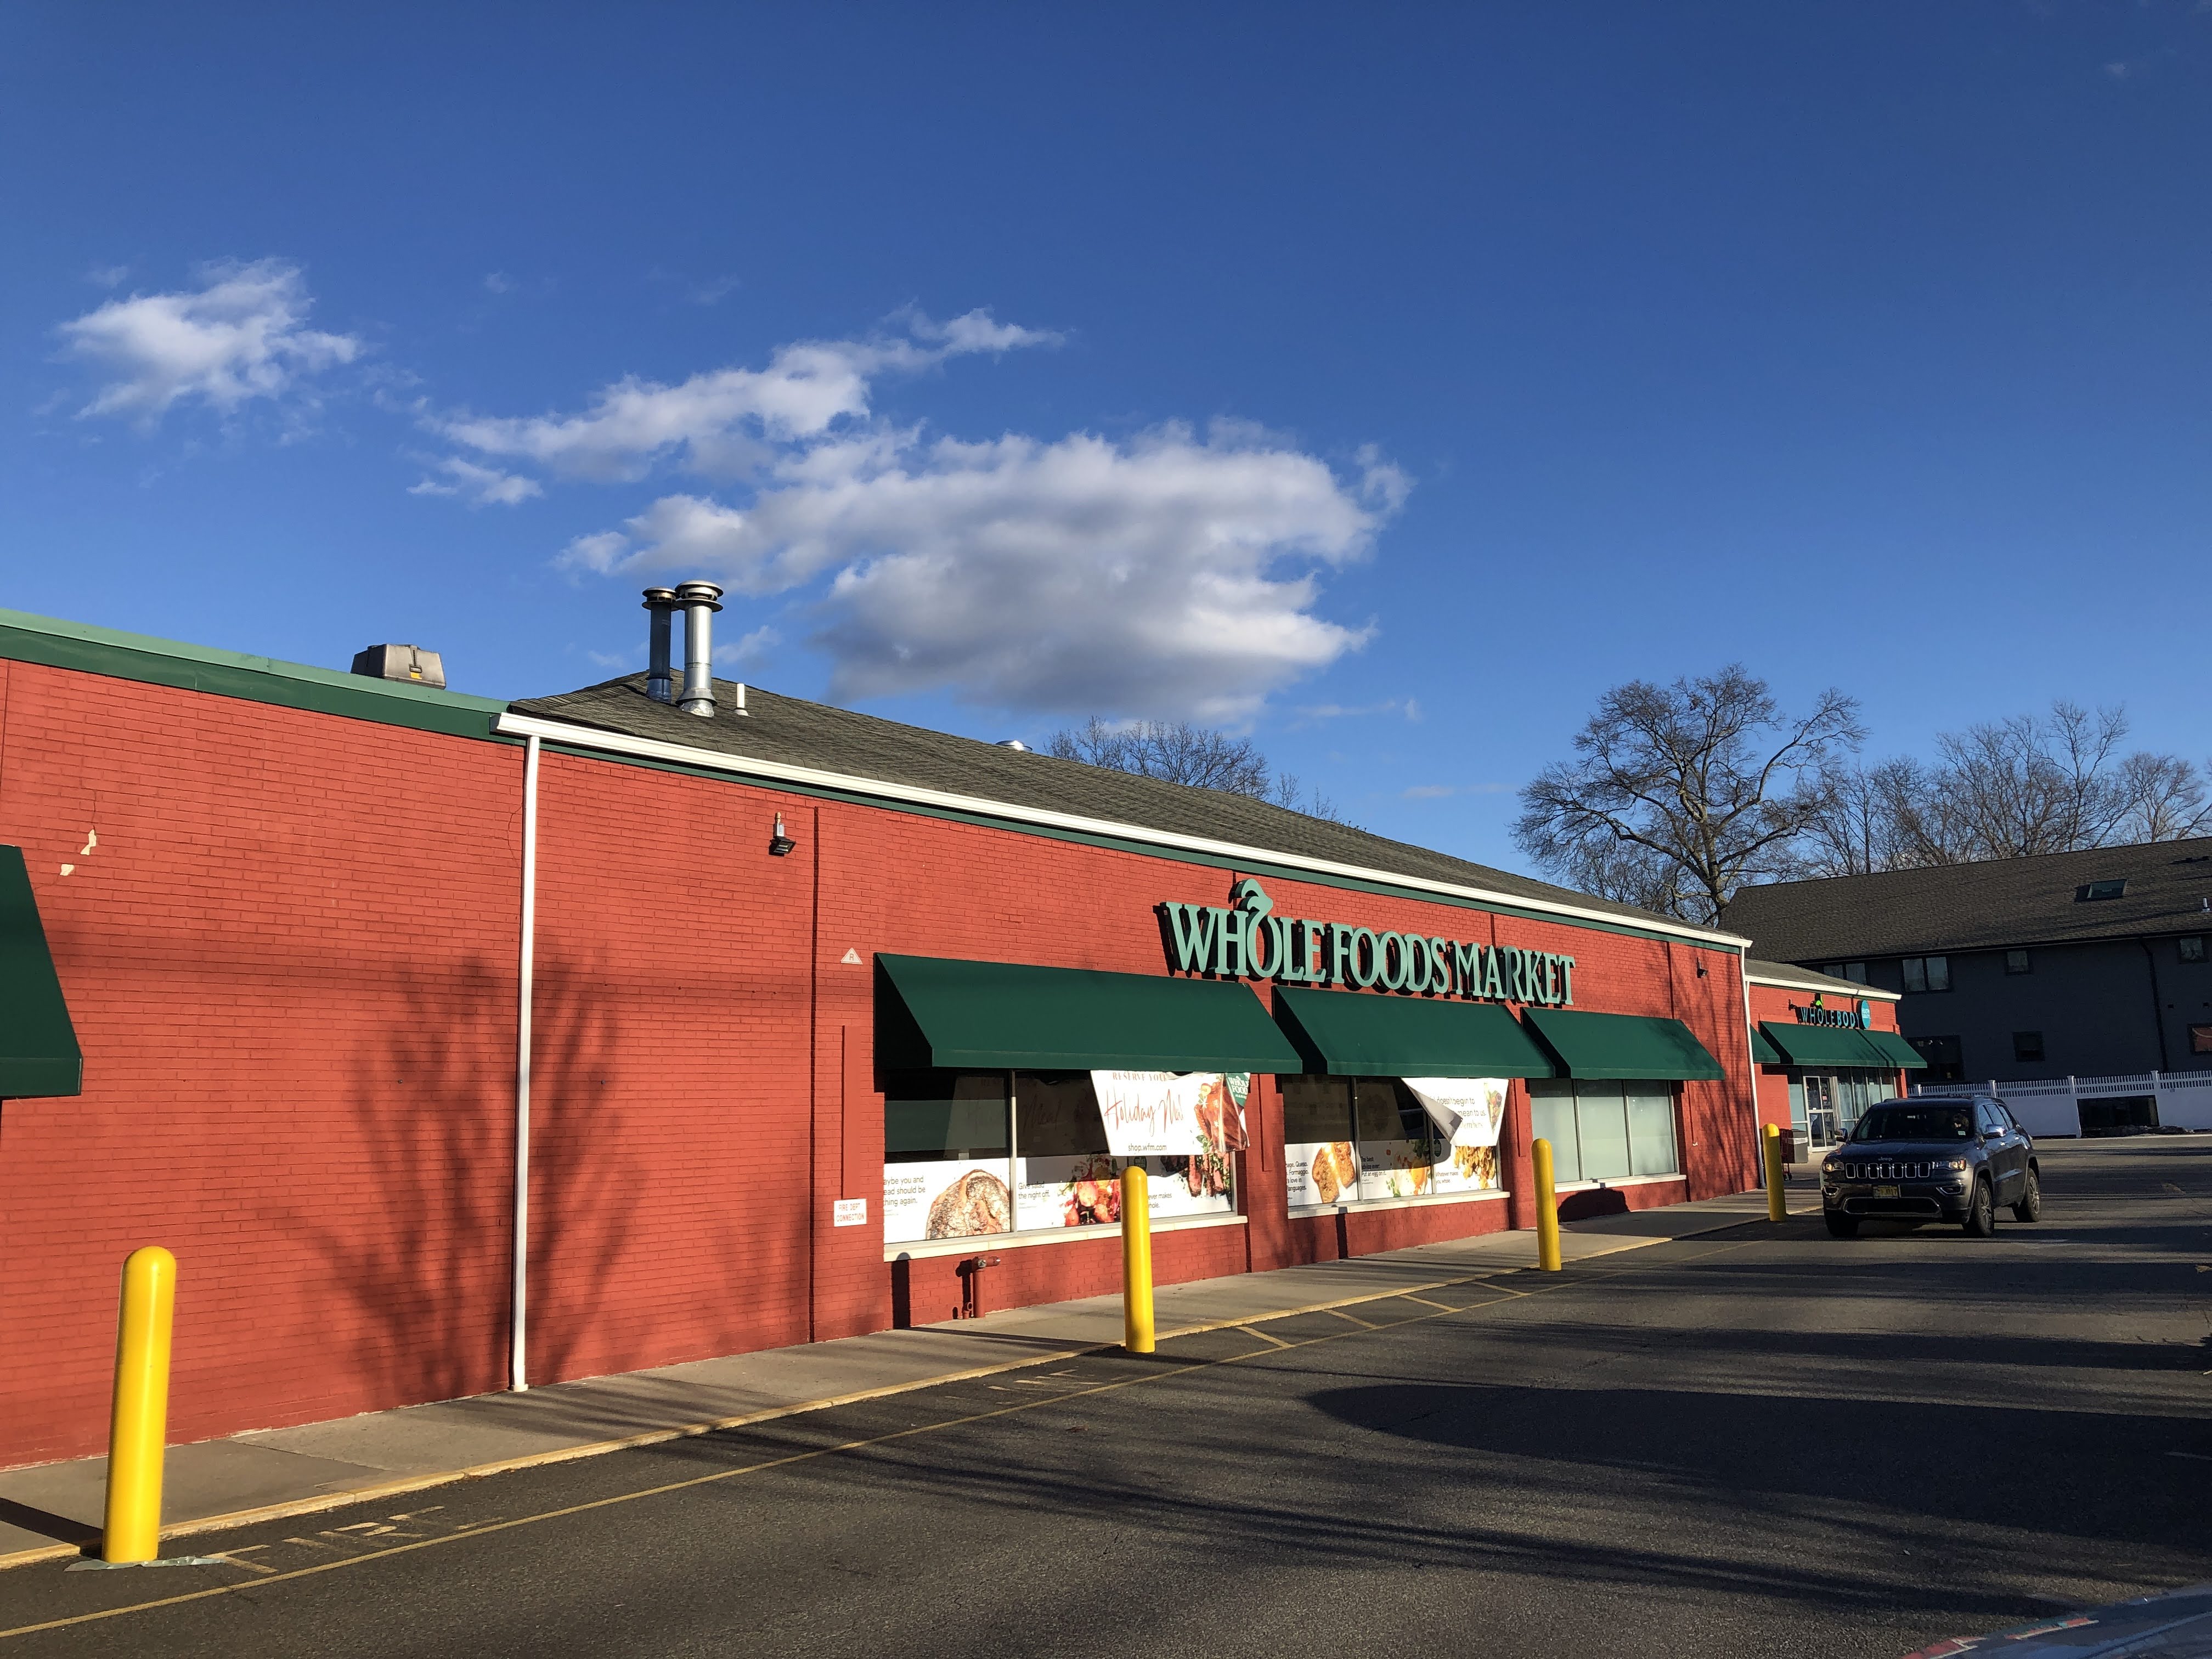 South Windsor's new Whole Foods supermarket could be open by January